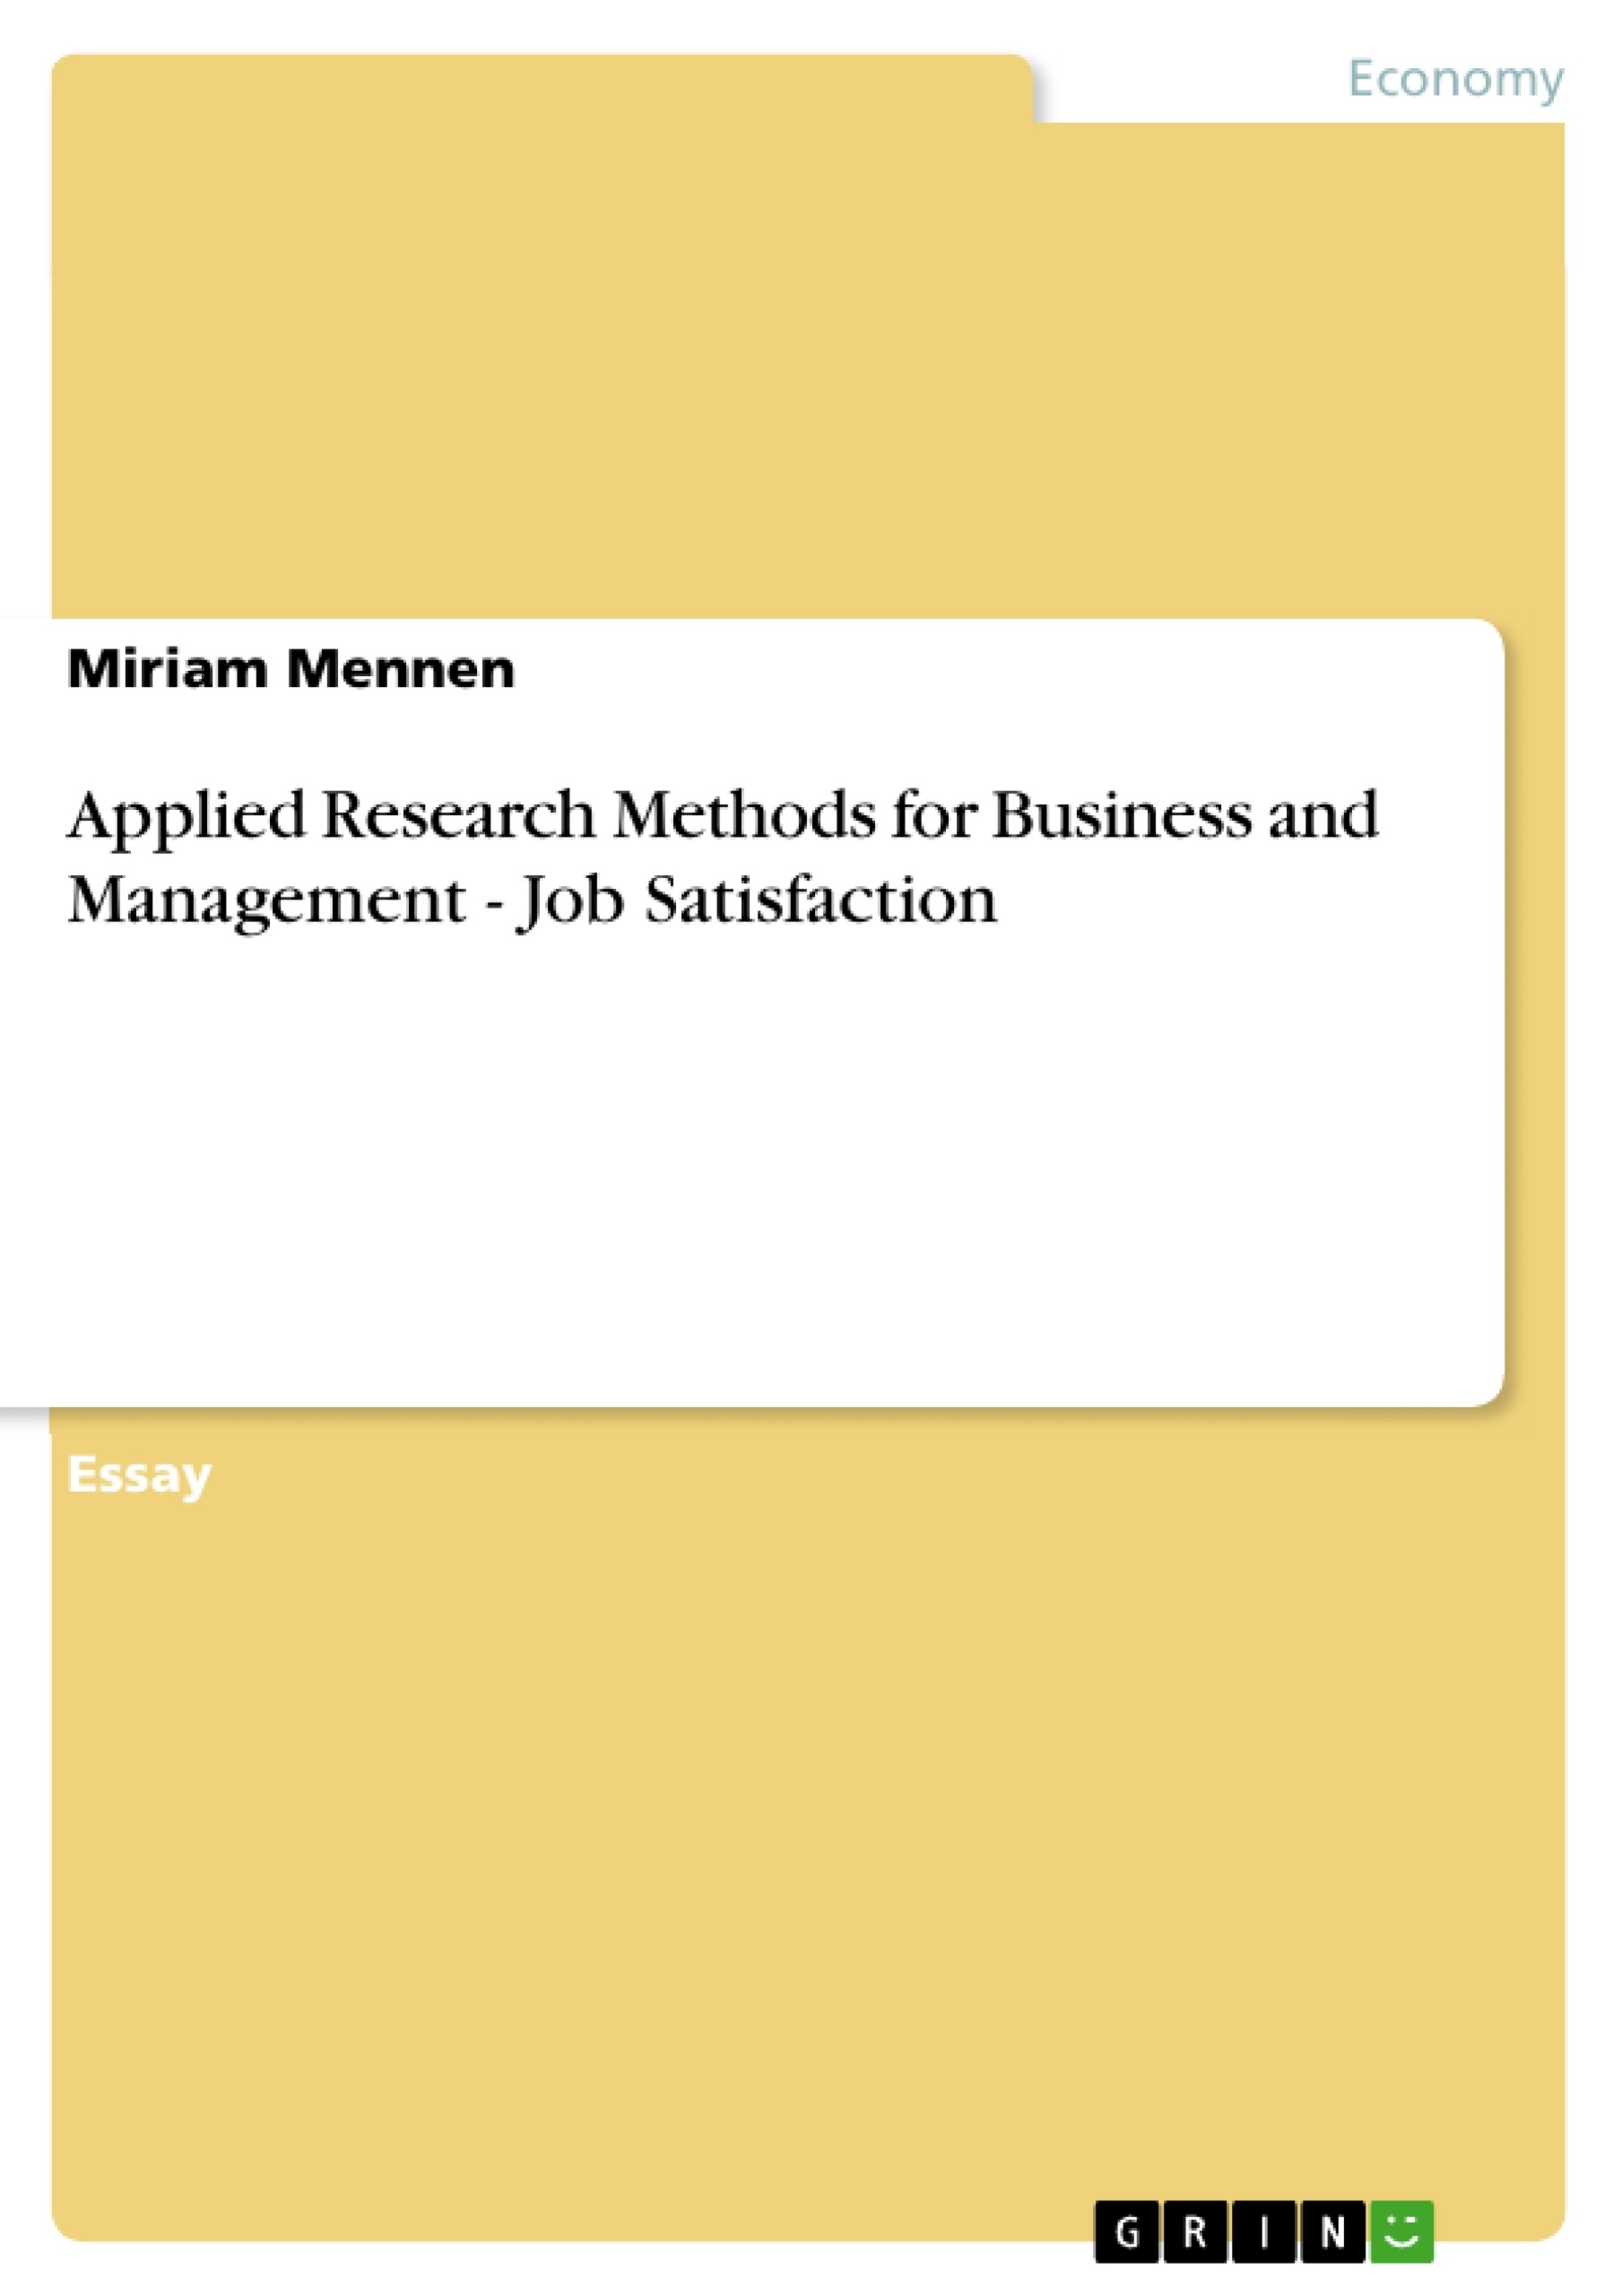 Título: Applied Research Methods for Business and Management - Job Satisfaction